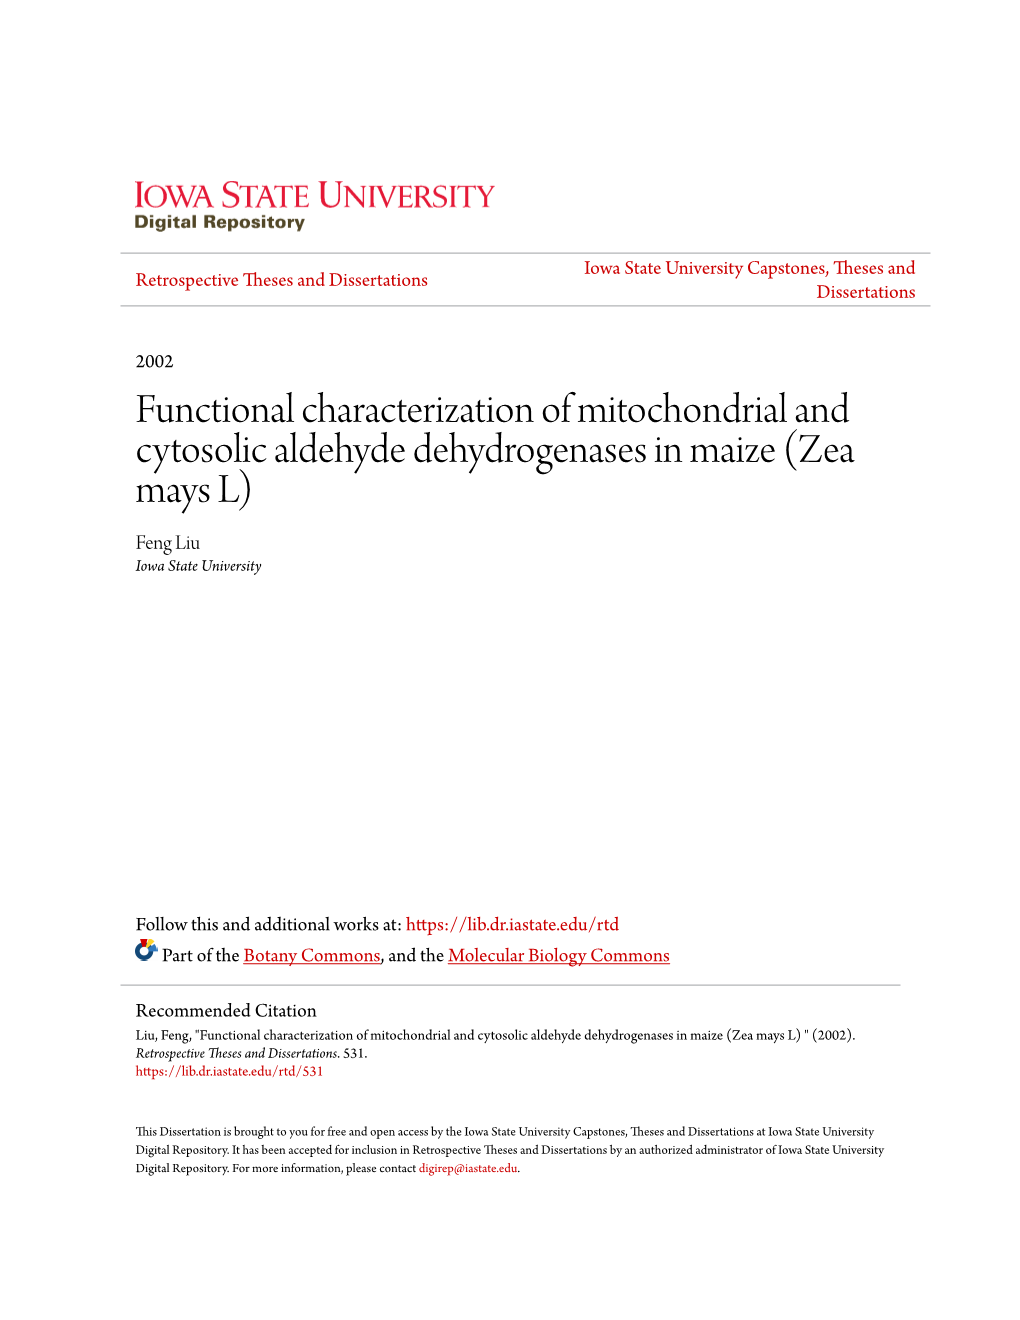 Functional Characterization of Mitochondrial and Cytosolic Aldehyde Dehydrogenases in Maize (Zea Mays L) Feng Liu Iowa State University